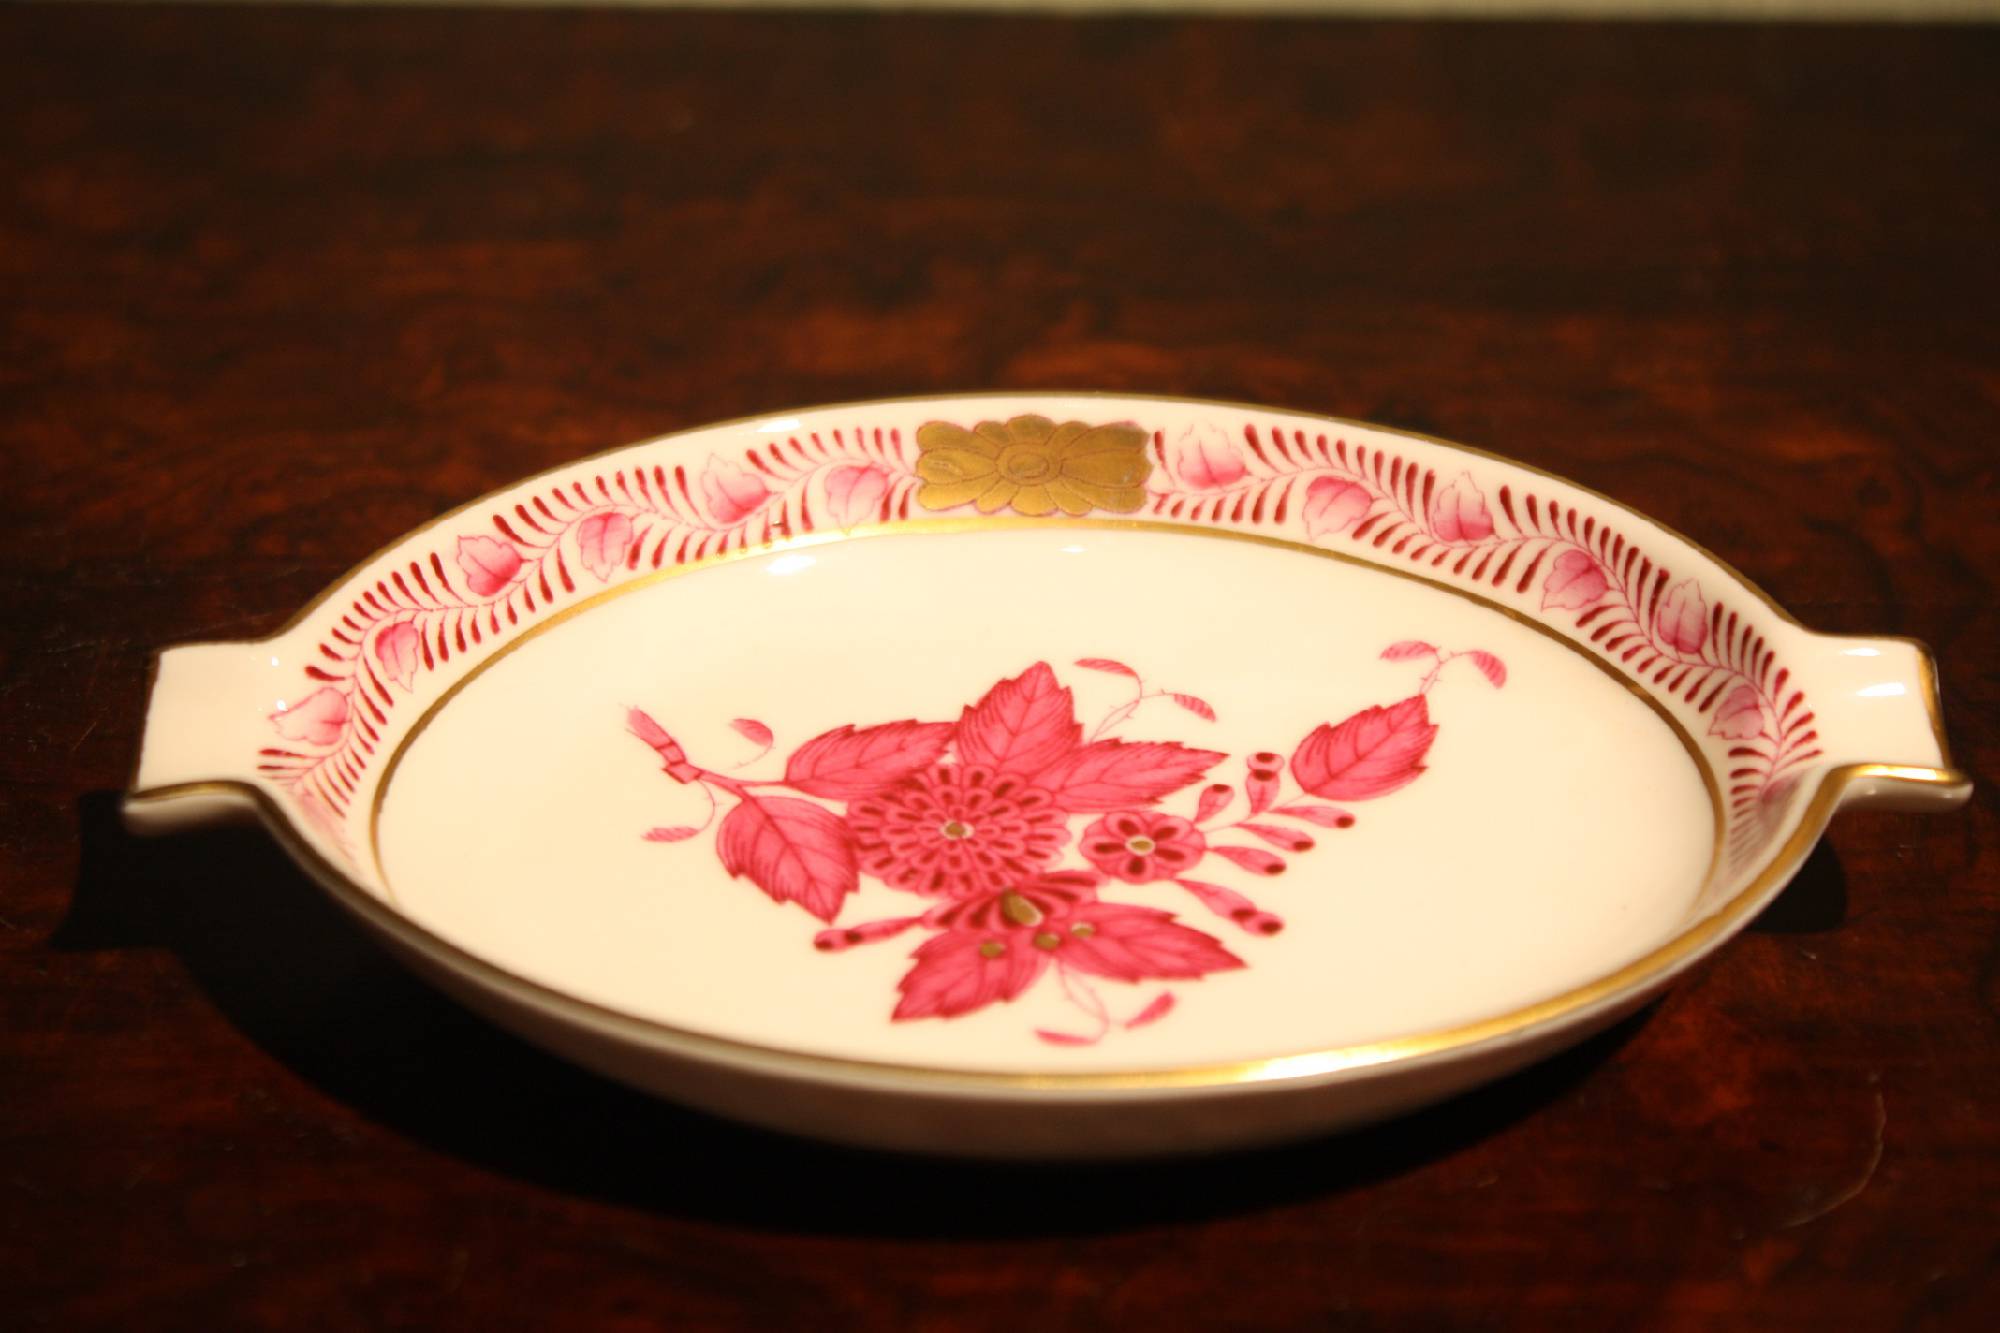 Small European rosé flowers ornate porcelain ash tray by Herend, Hungary, 20th century